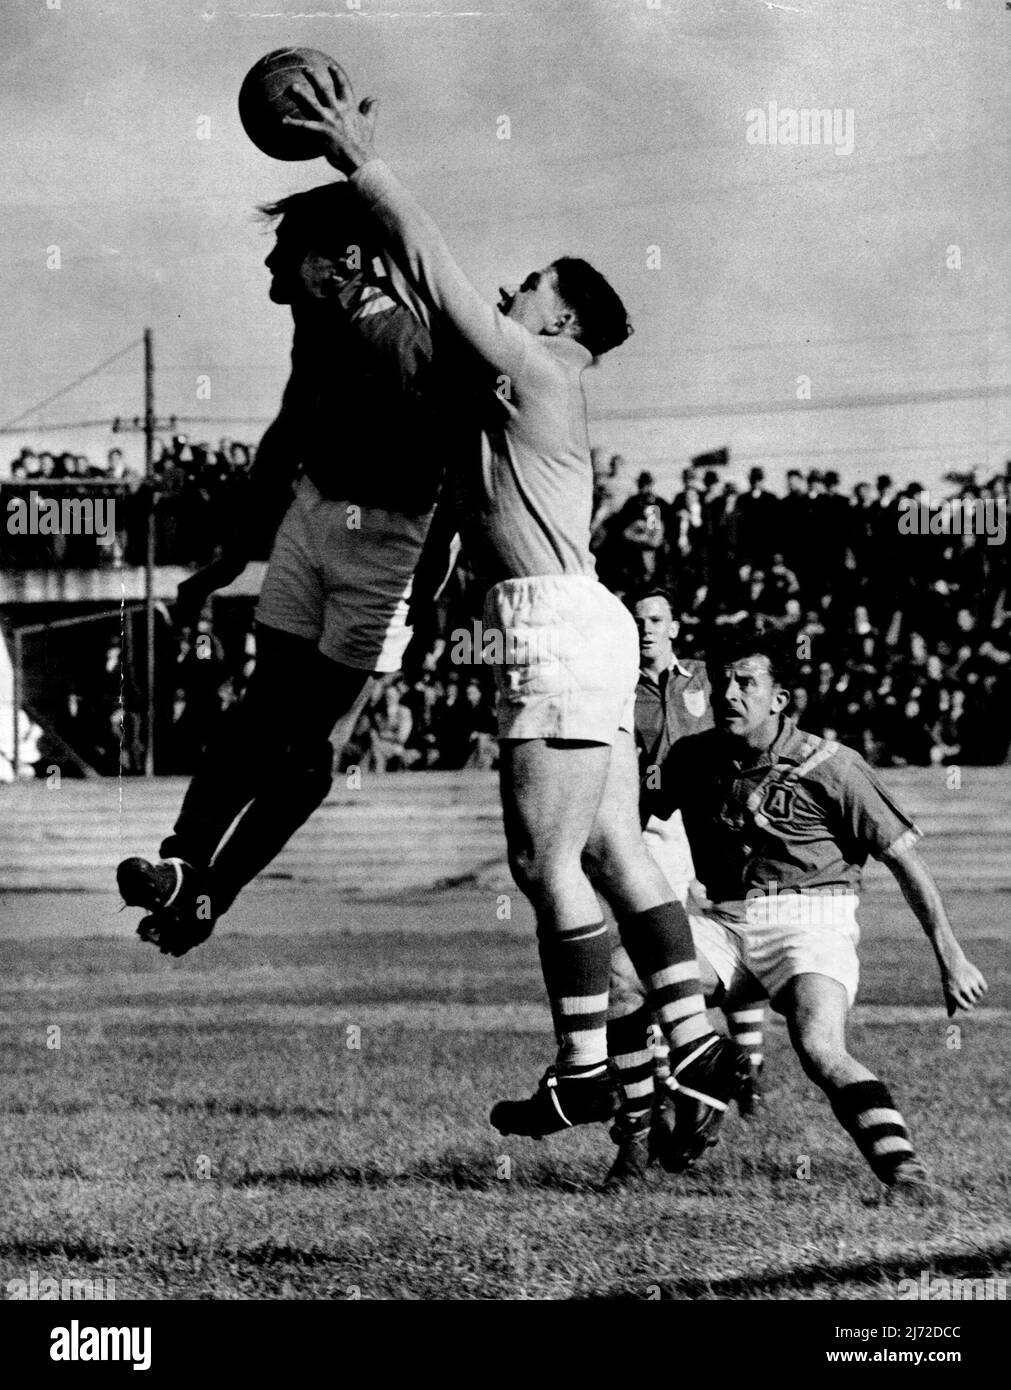 Ron Lord leaps into the air to talk the ball and save a desperate situation. NSW Goalkeeper Ron Lord, in brilliant form for NSW against the Australian Soccer team at the Sports Ground yesterday, flies in the air to take the ball from the head of Gordon Nunn. Harry Robertson looks on, awaiting the outcome of play. September 5, 1950. Stock Photo